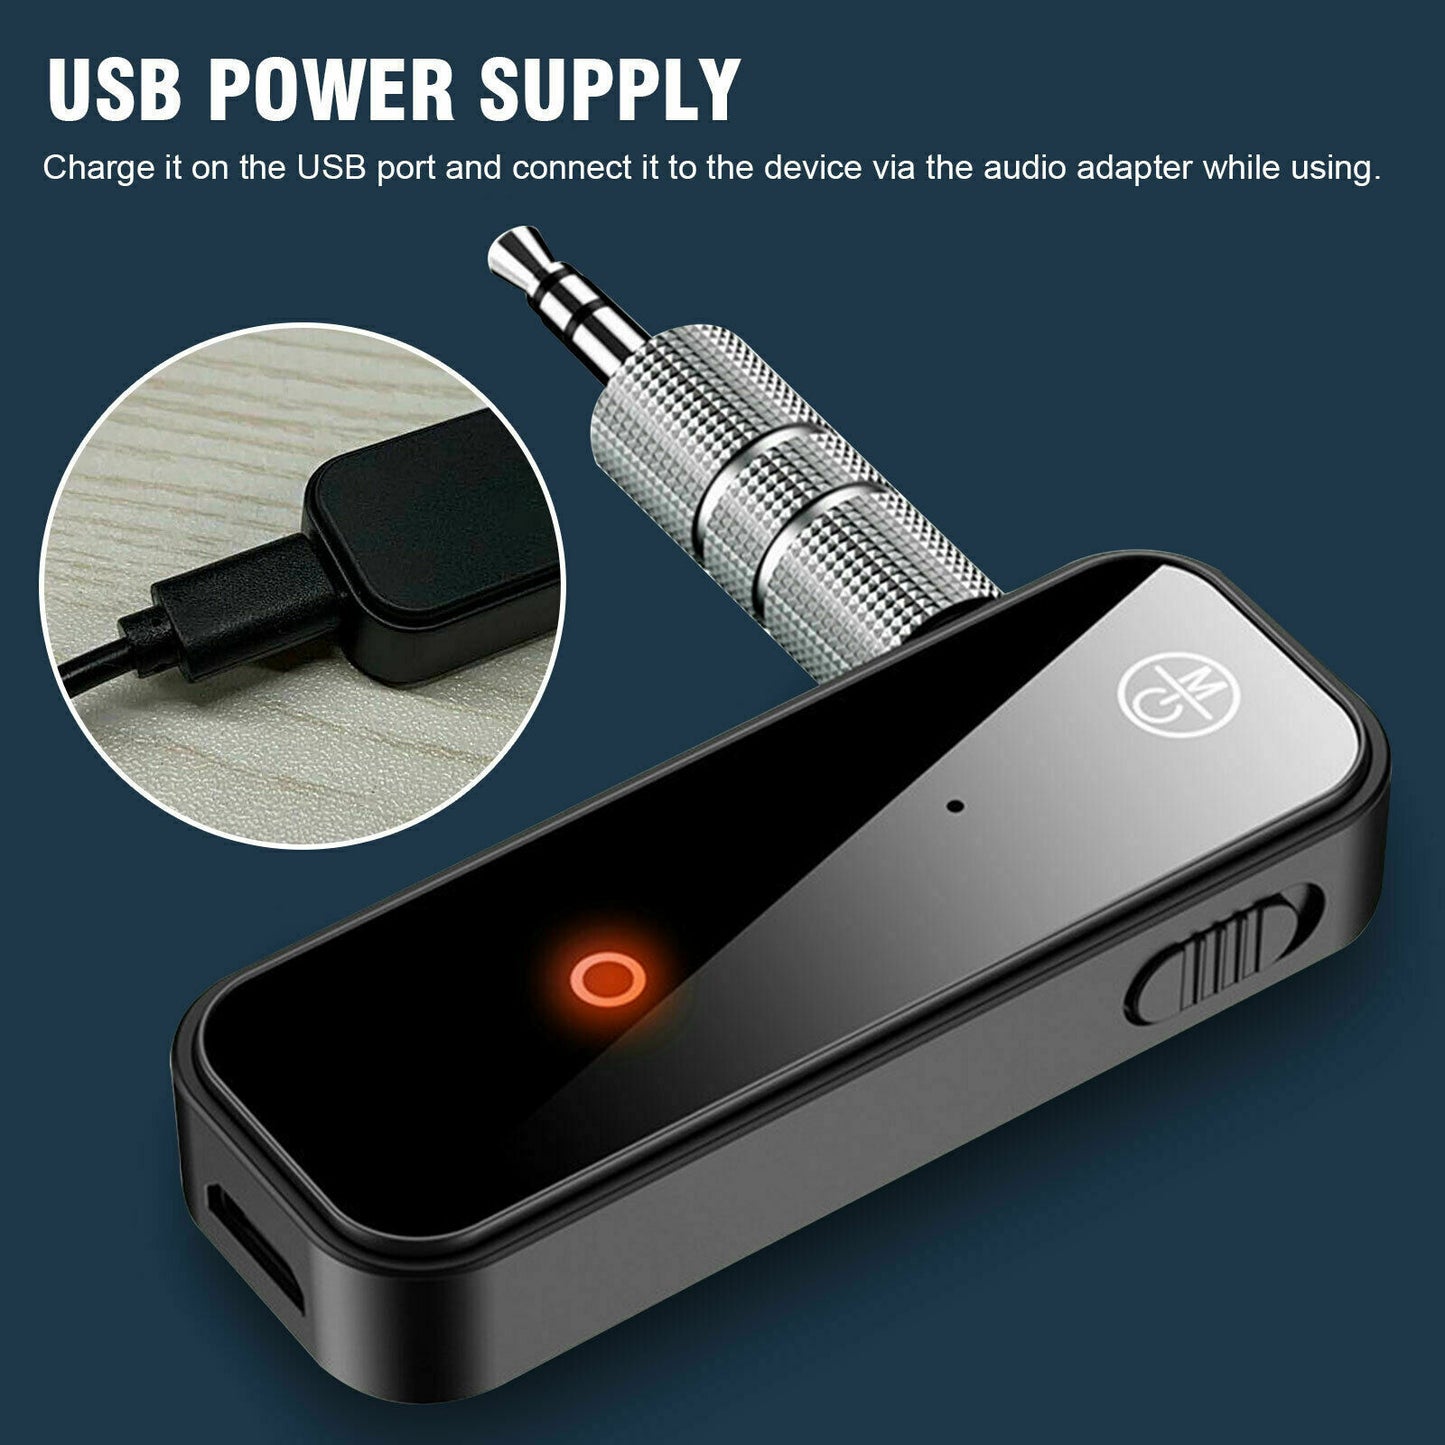 Bluetooth 5.0 2in1 Transmitter Receiver Car Wireless Audio Adapter USB 3.5mm Aux